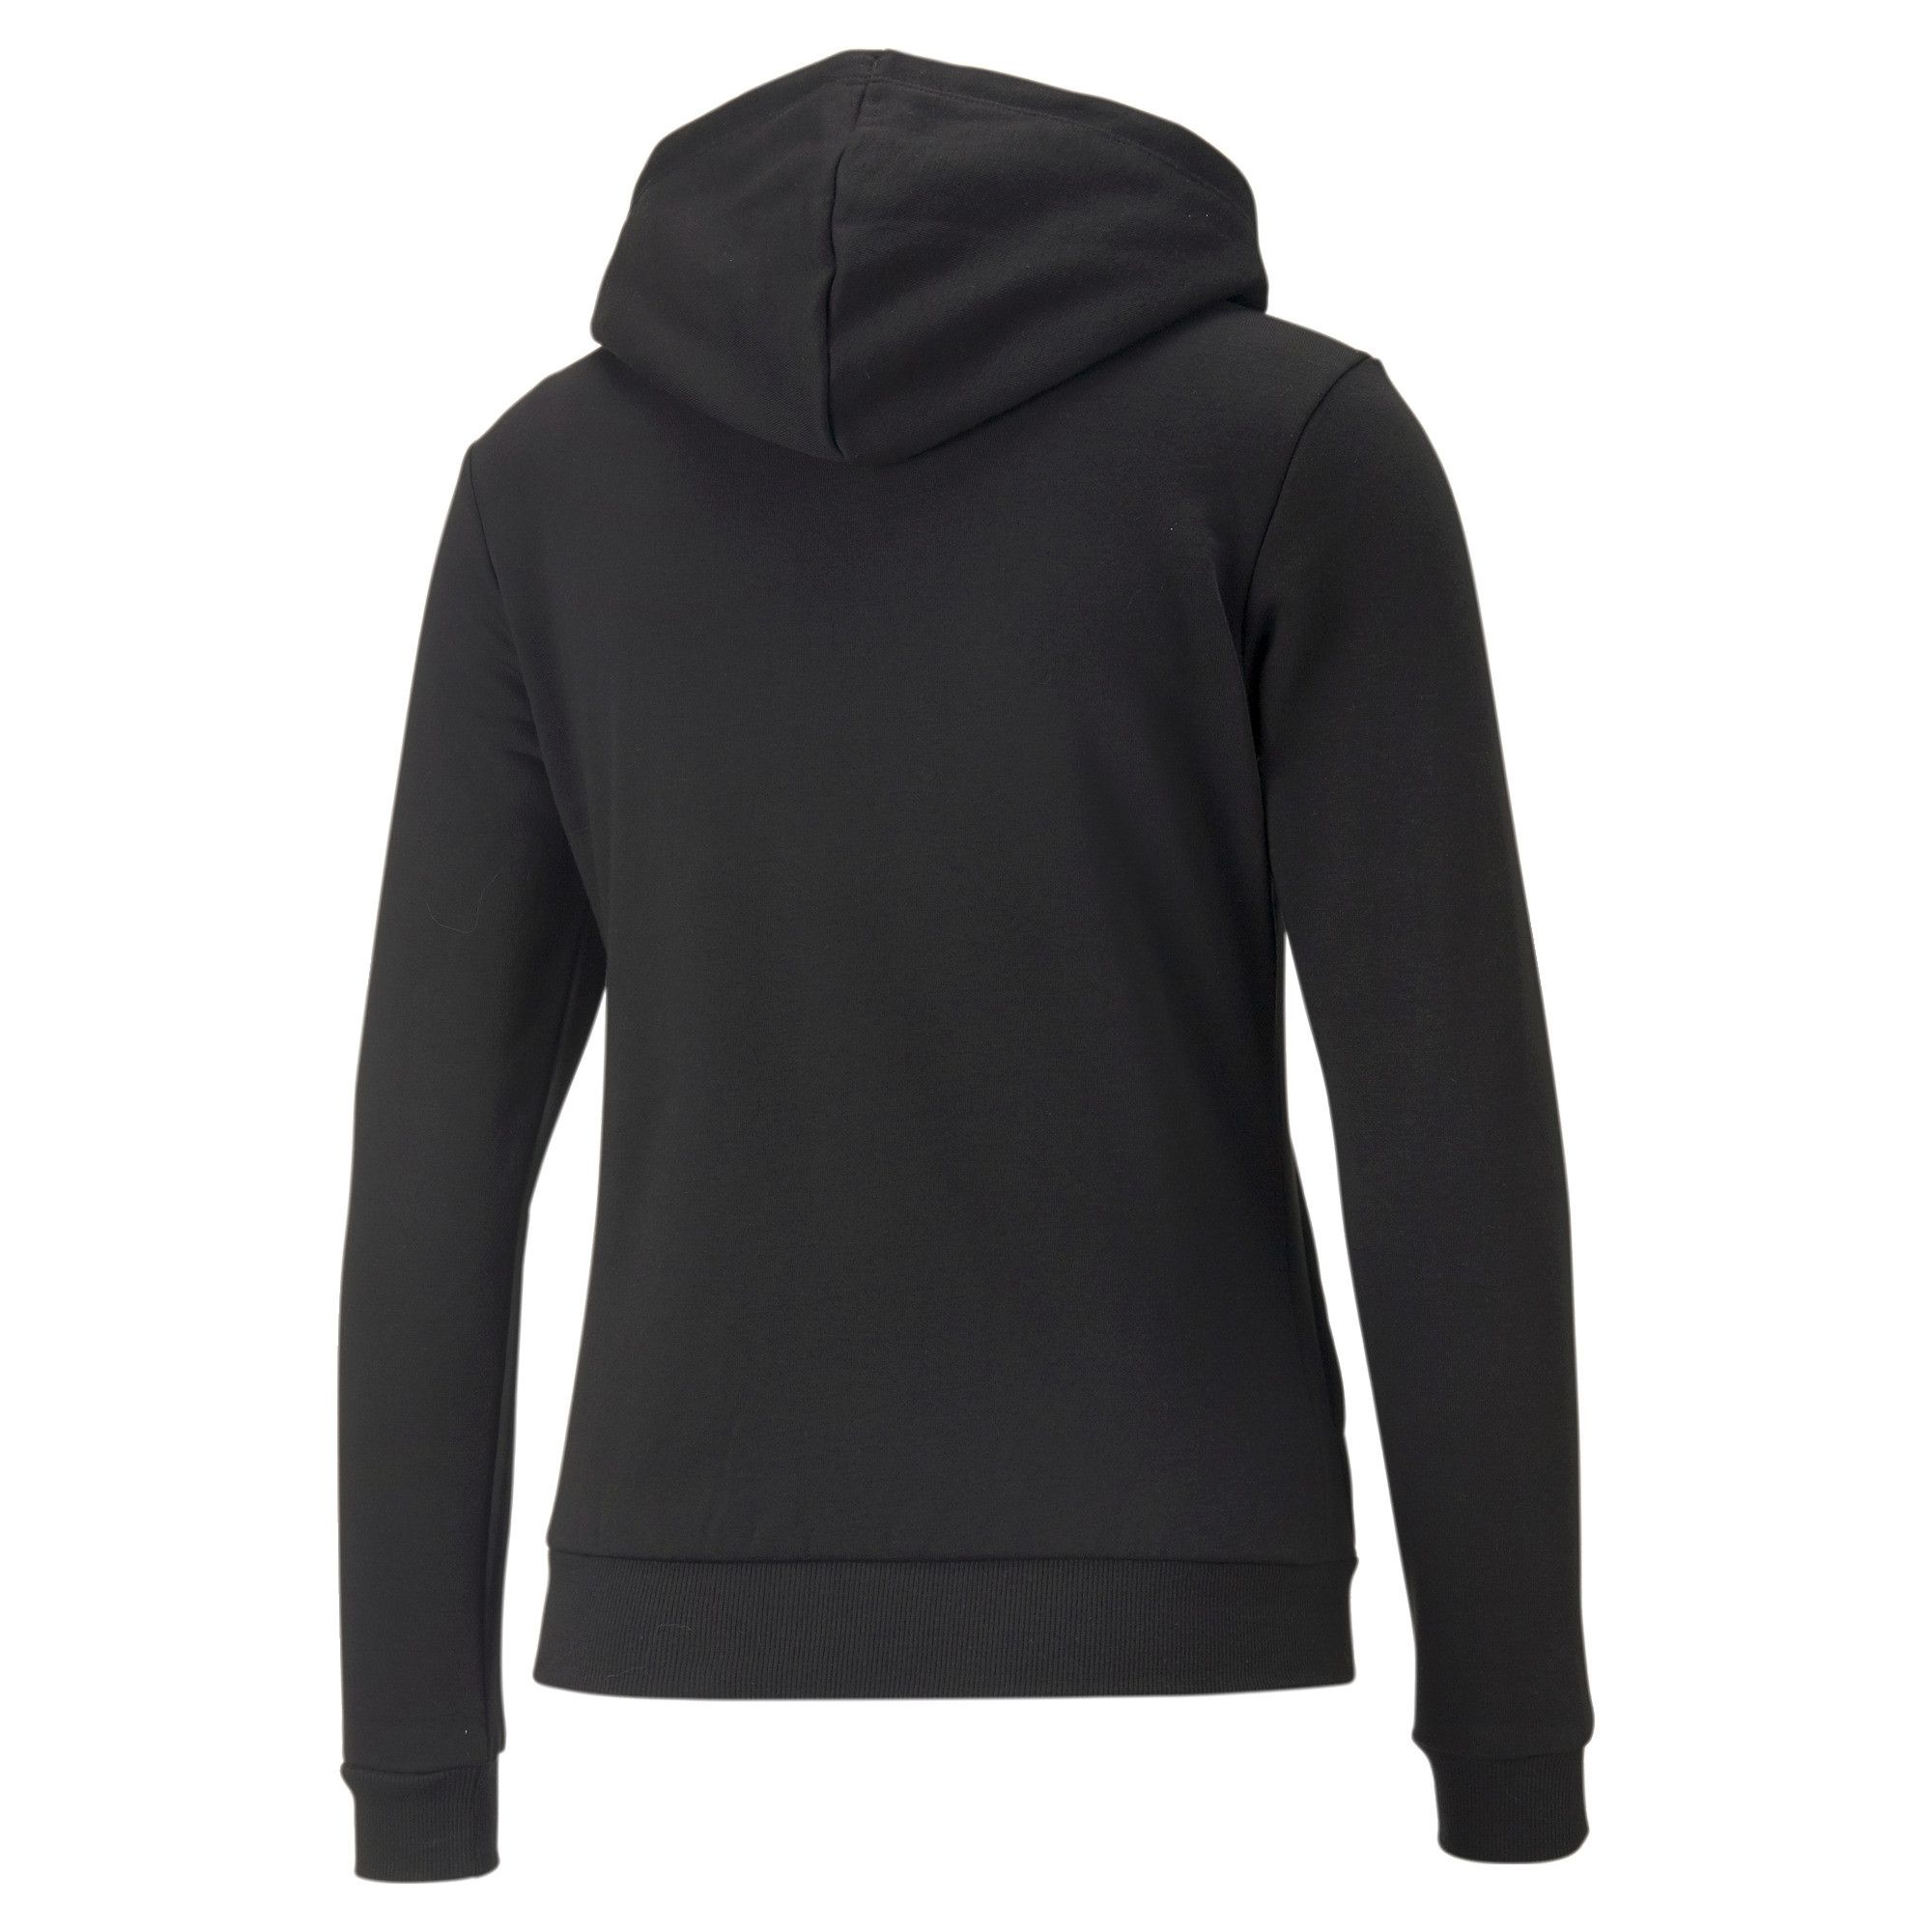  Who doesn't need a full-length hoodie in their wardrobe? This versatile piece of clothing is a total must-have. Taken from our Essentials Collection, this comfortable hoodie features a full-length zip, so it's easy to get on or off. Made with the same quality you've come to expect from PUMA, this hoodie will quickly become a regular go-to item.